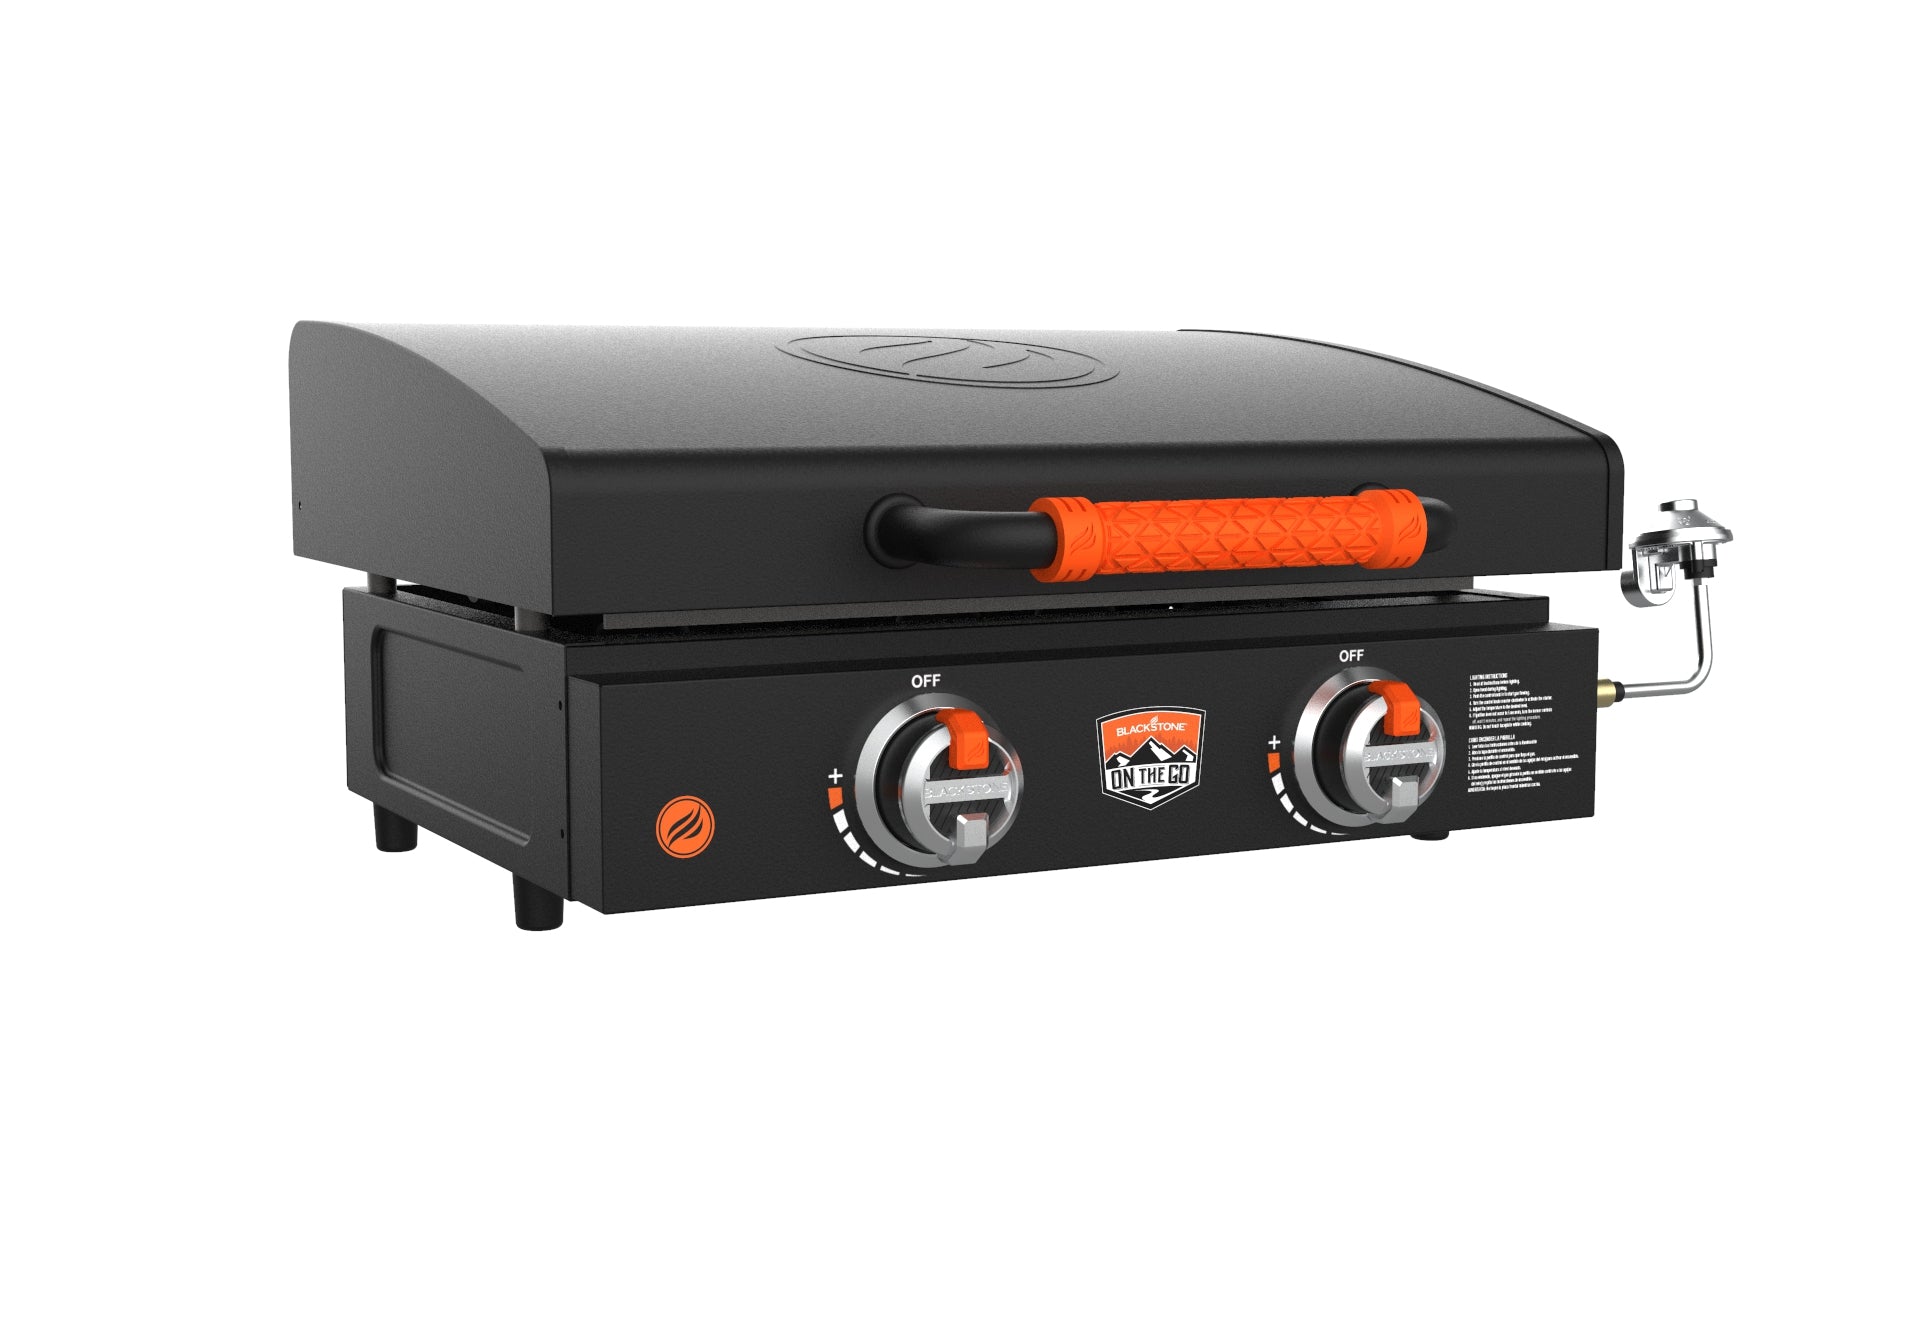 Blackstone 2224 On-The-Go 22" Omnivore Tabletop Griddle with Hood